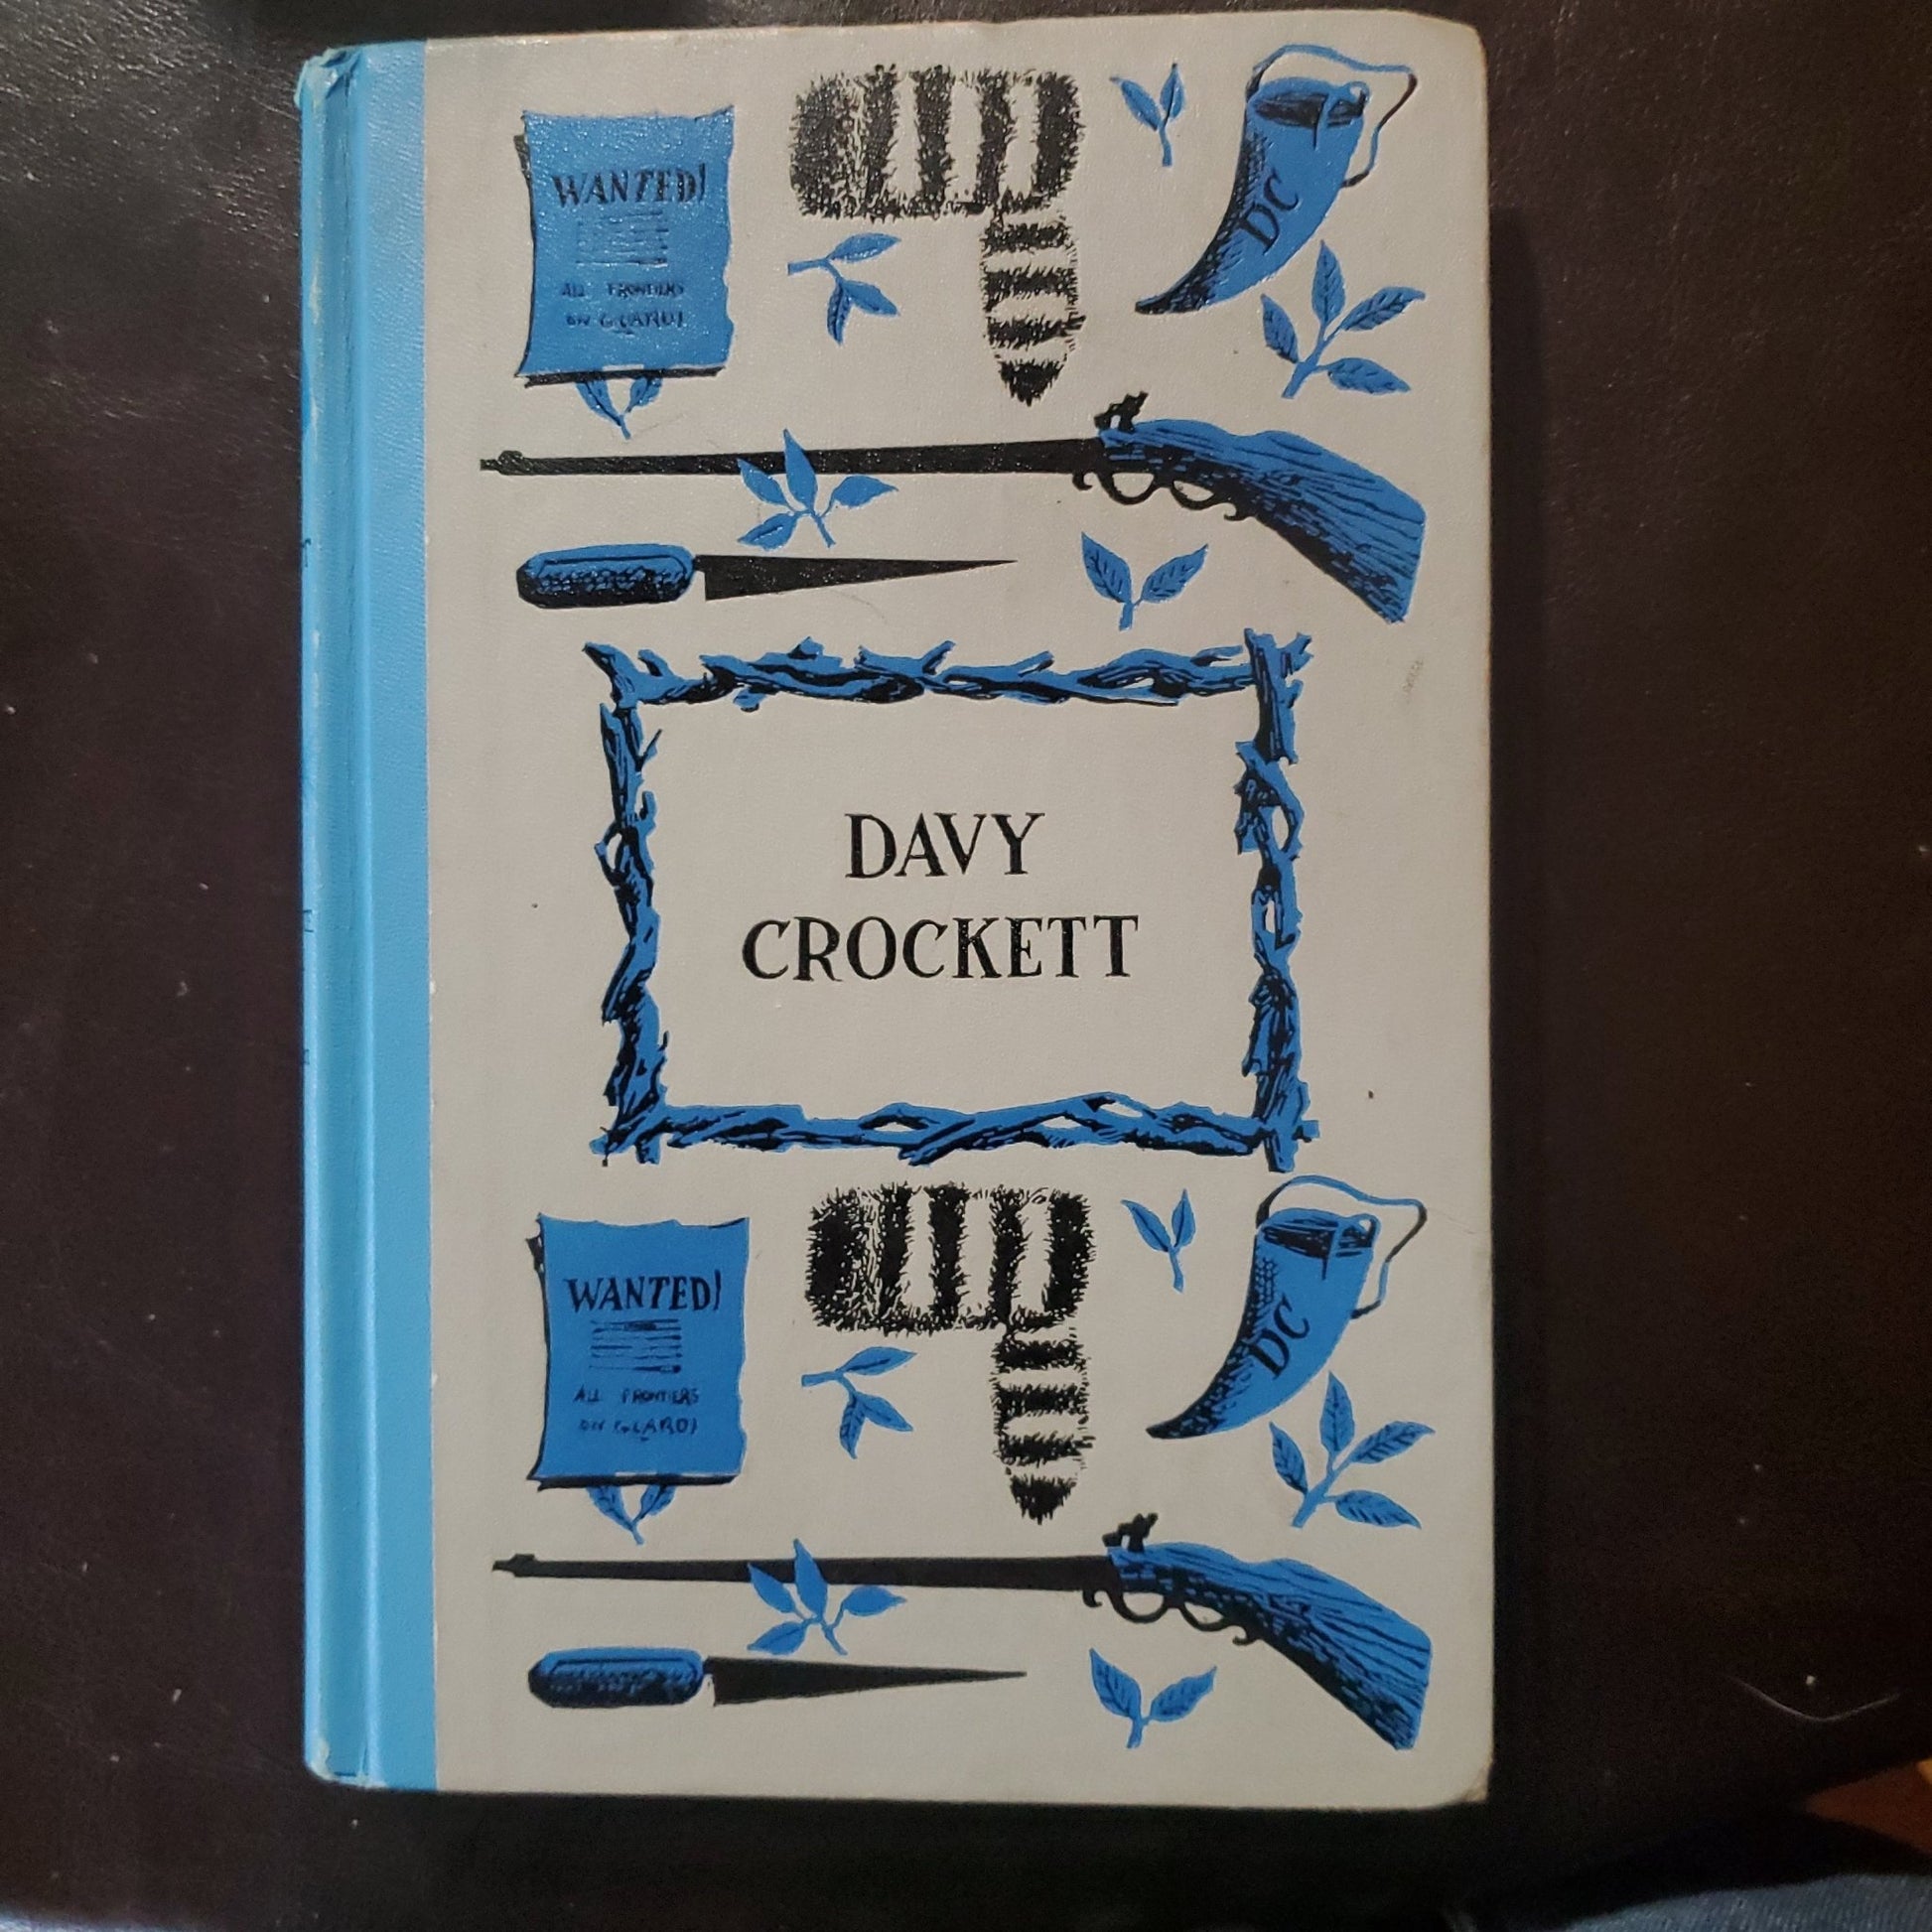 Davy Crockett - [ash-ling] Booksellers